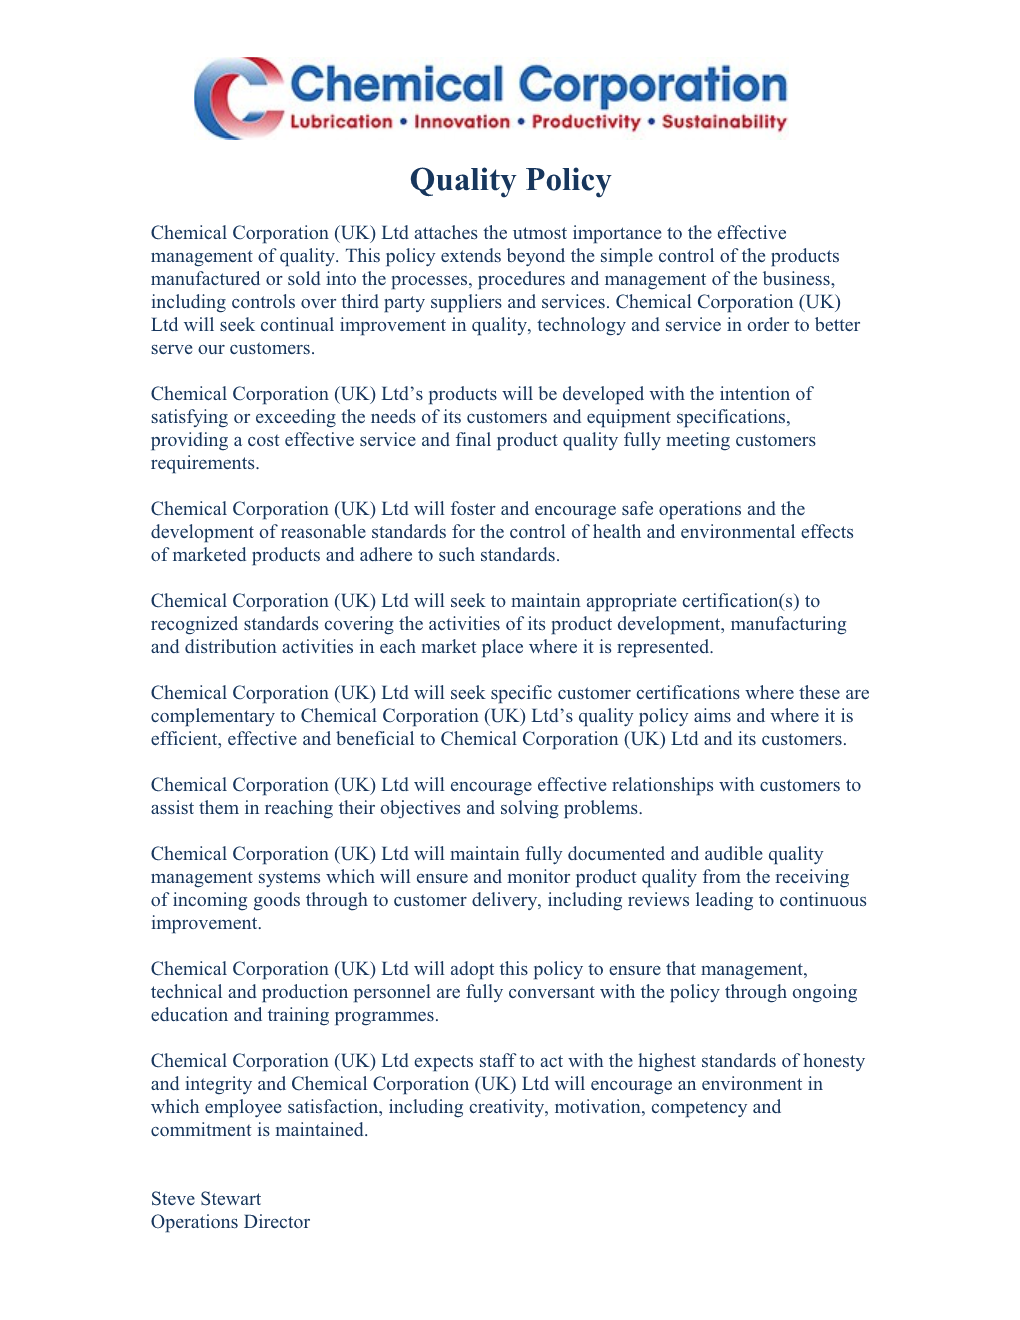 Chemical Corporation Limited Quality Policy